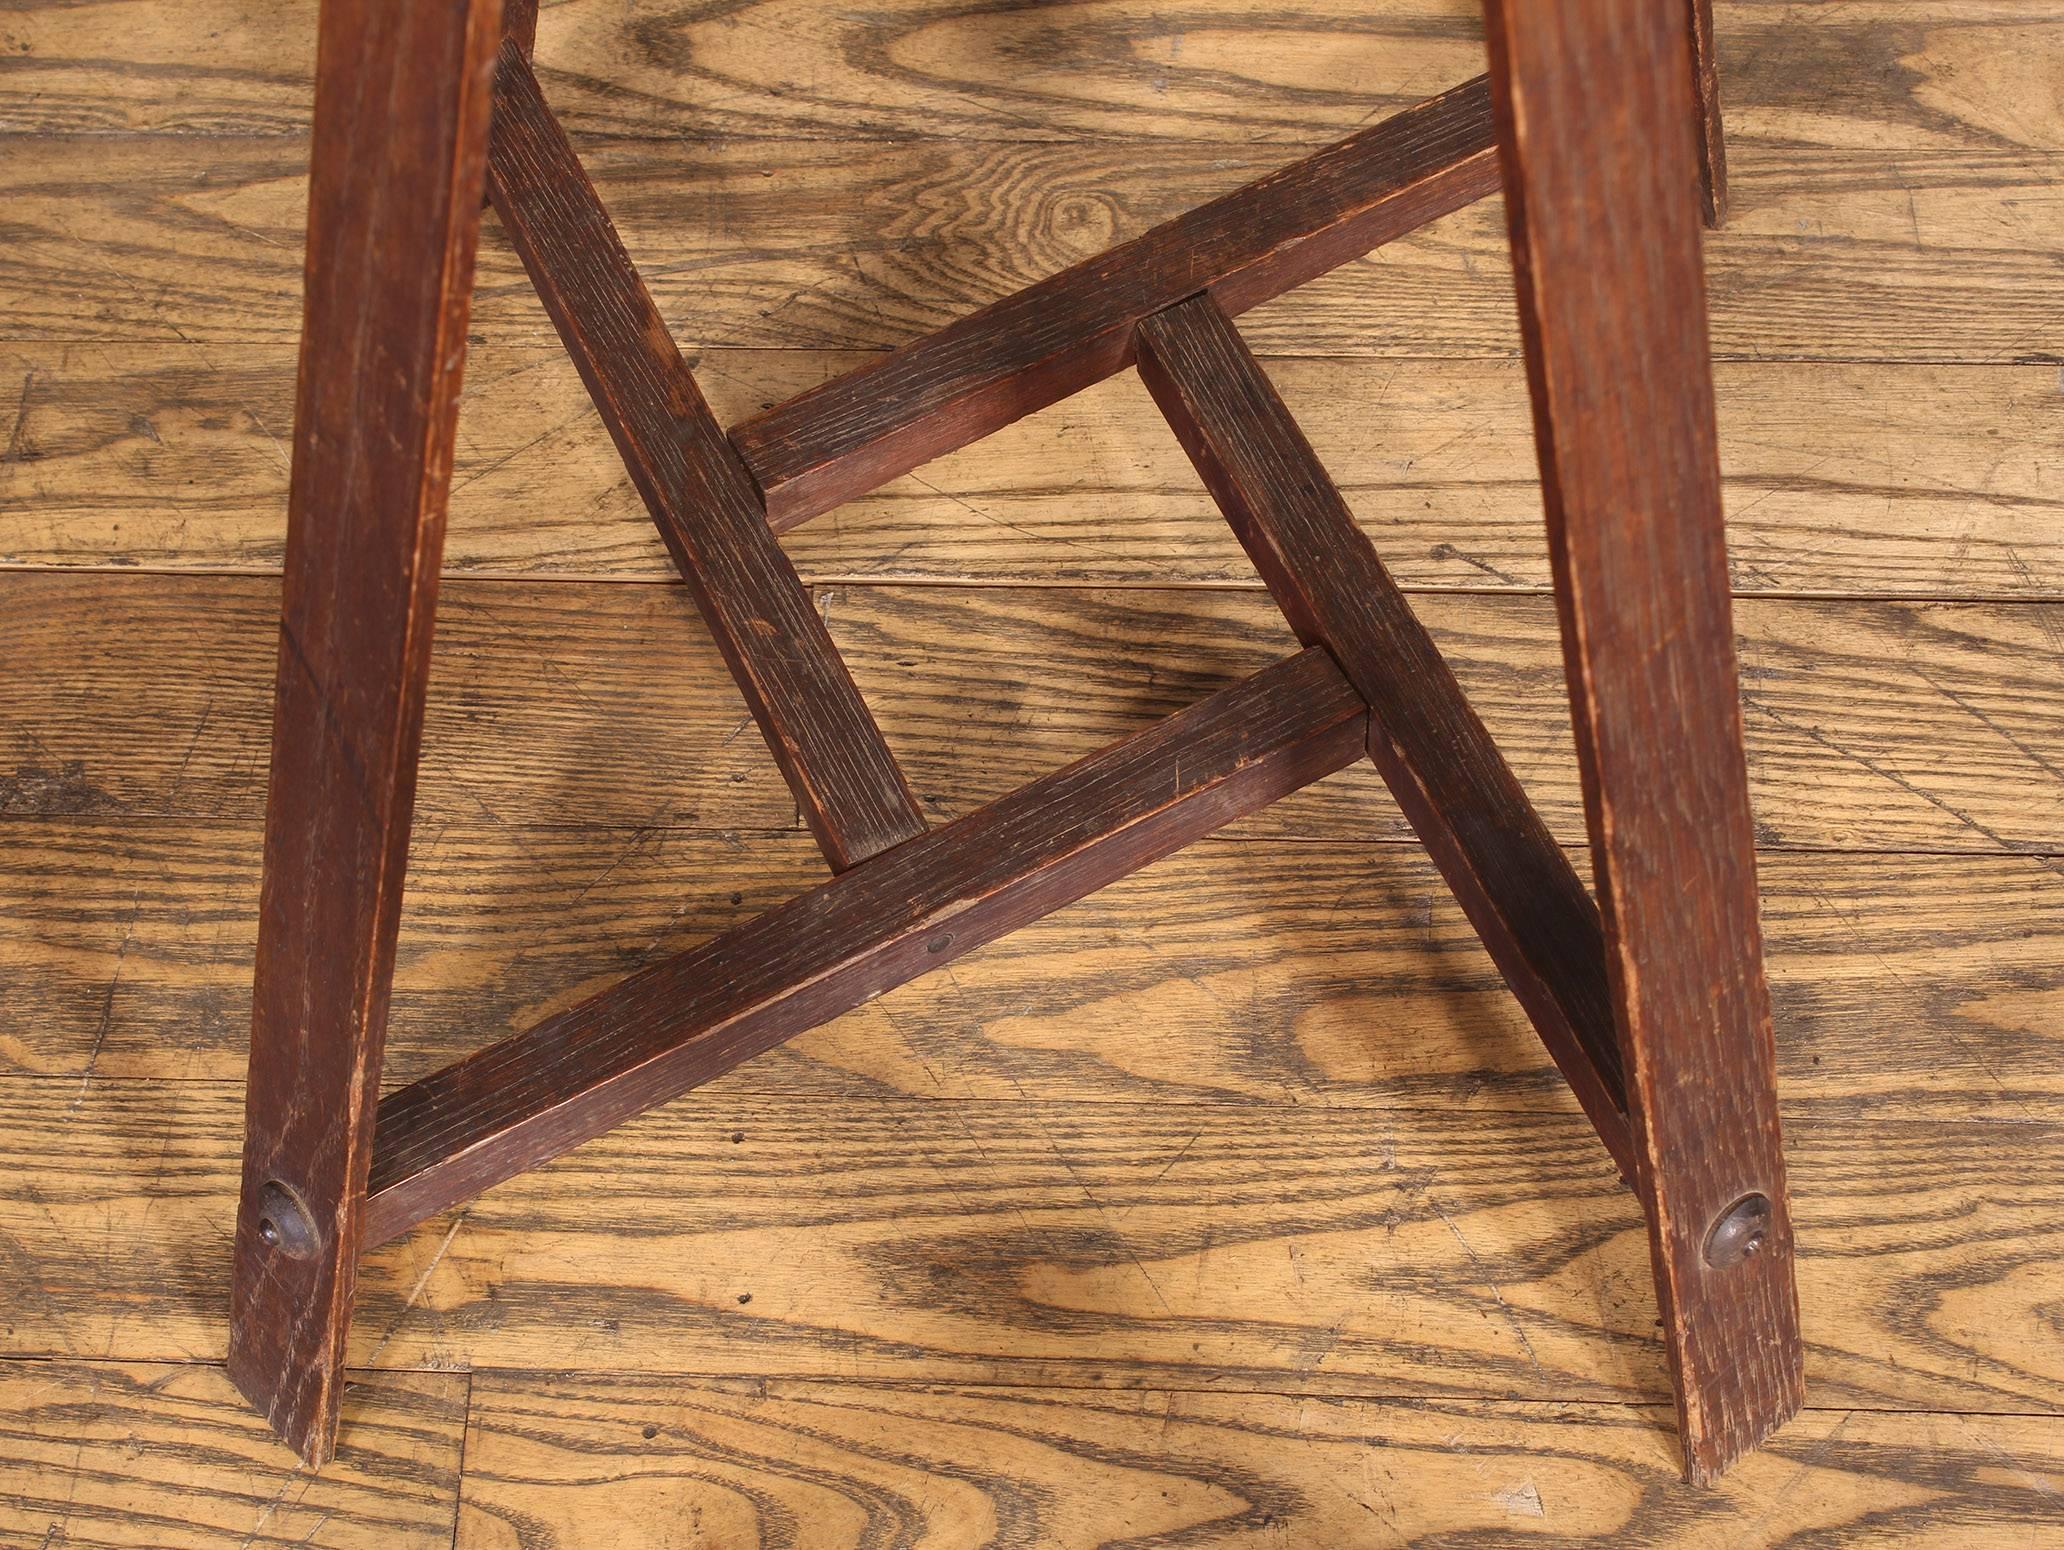 Vintage Arts & Crafts Style Wooden Coat Rack or Stand 3